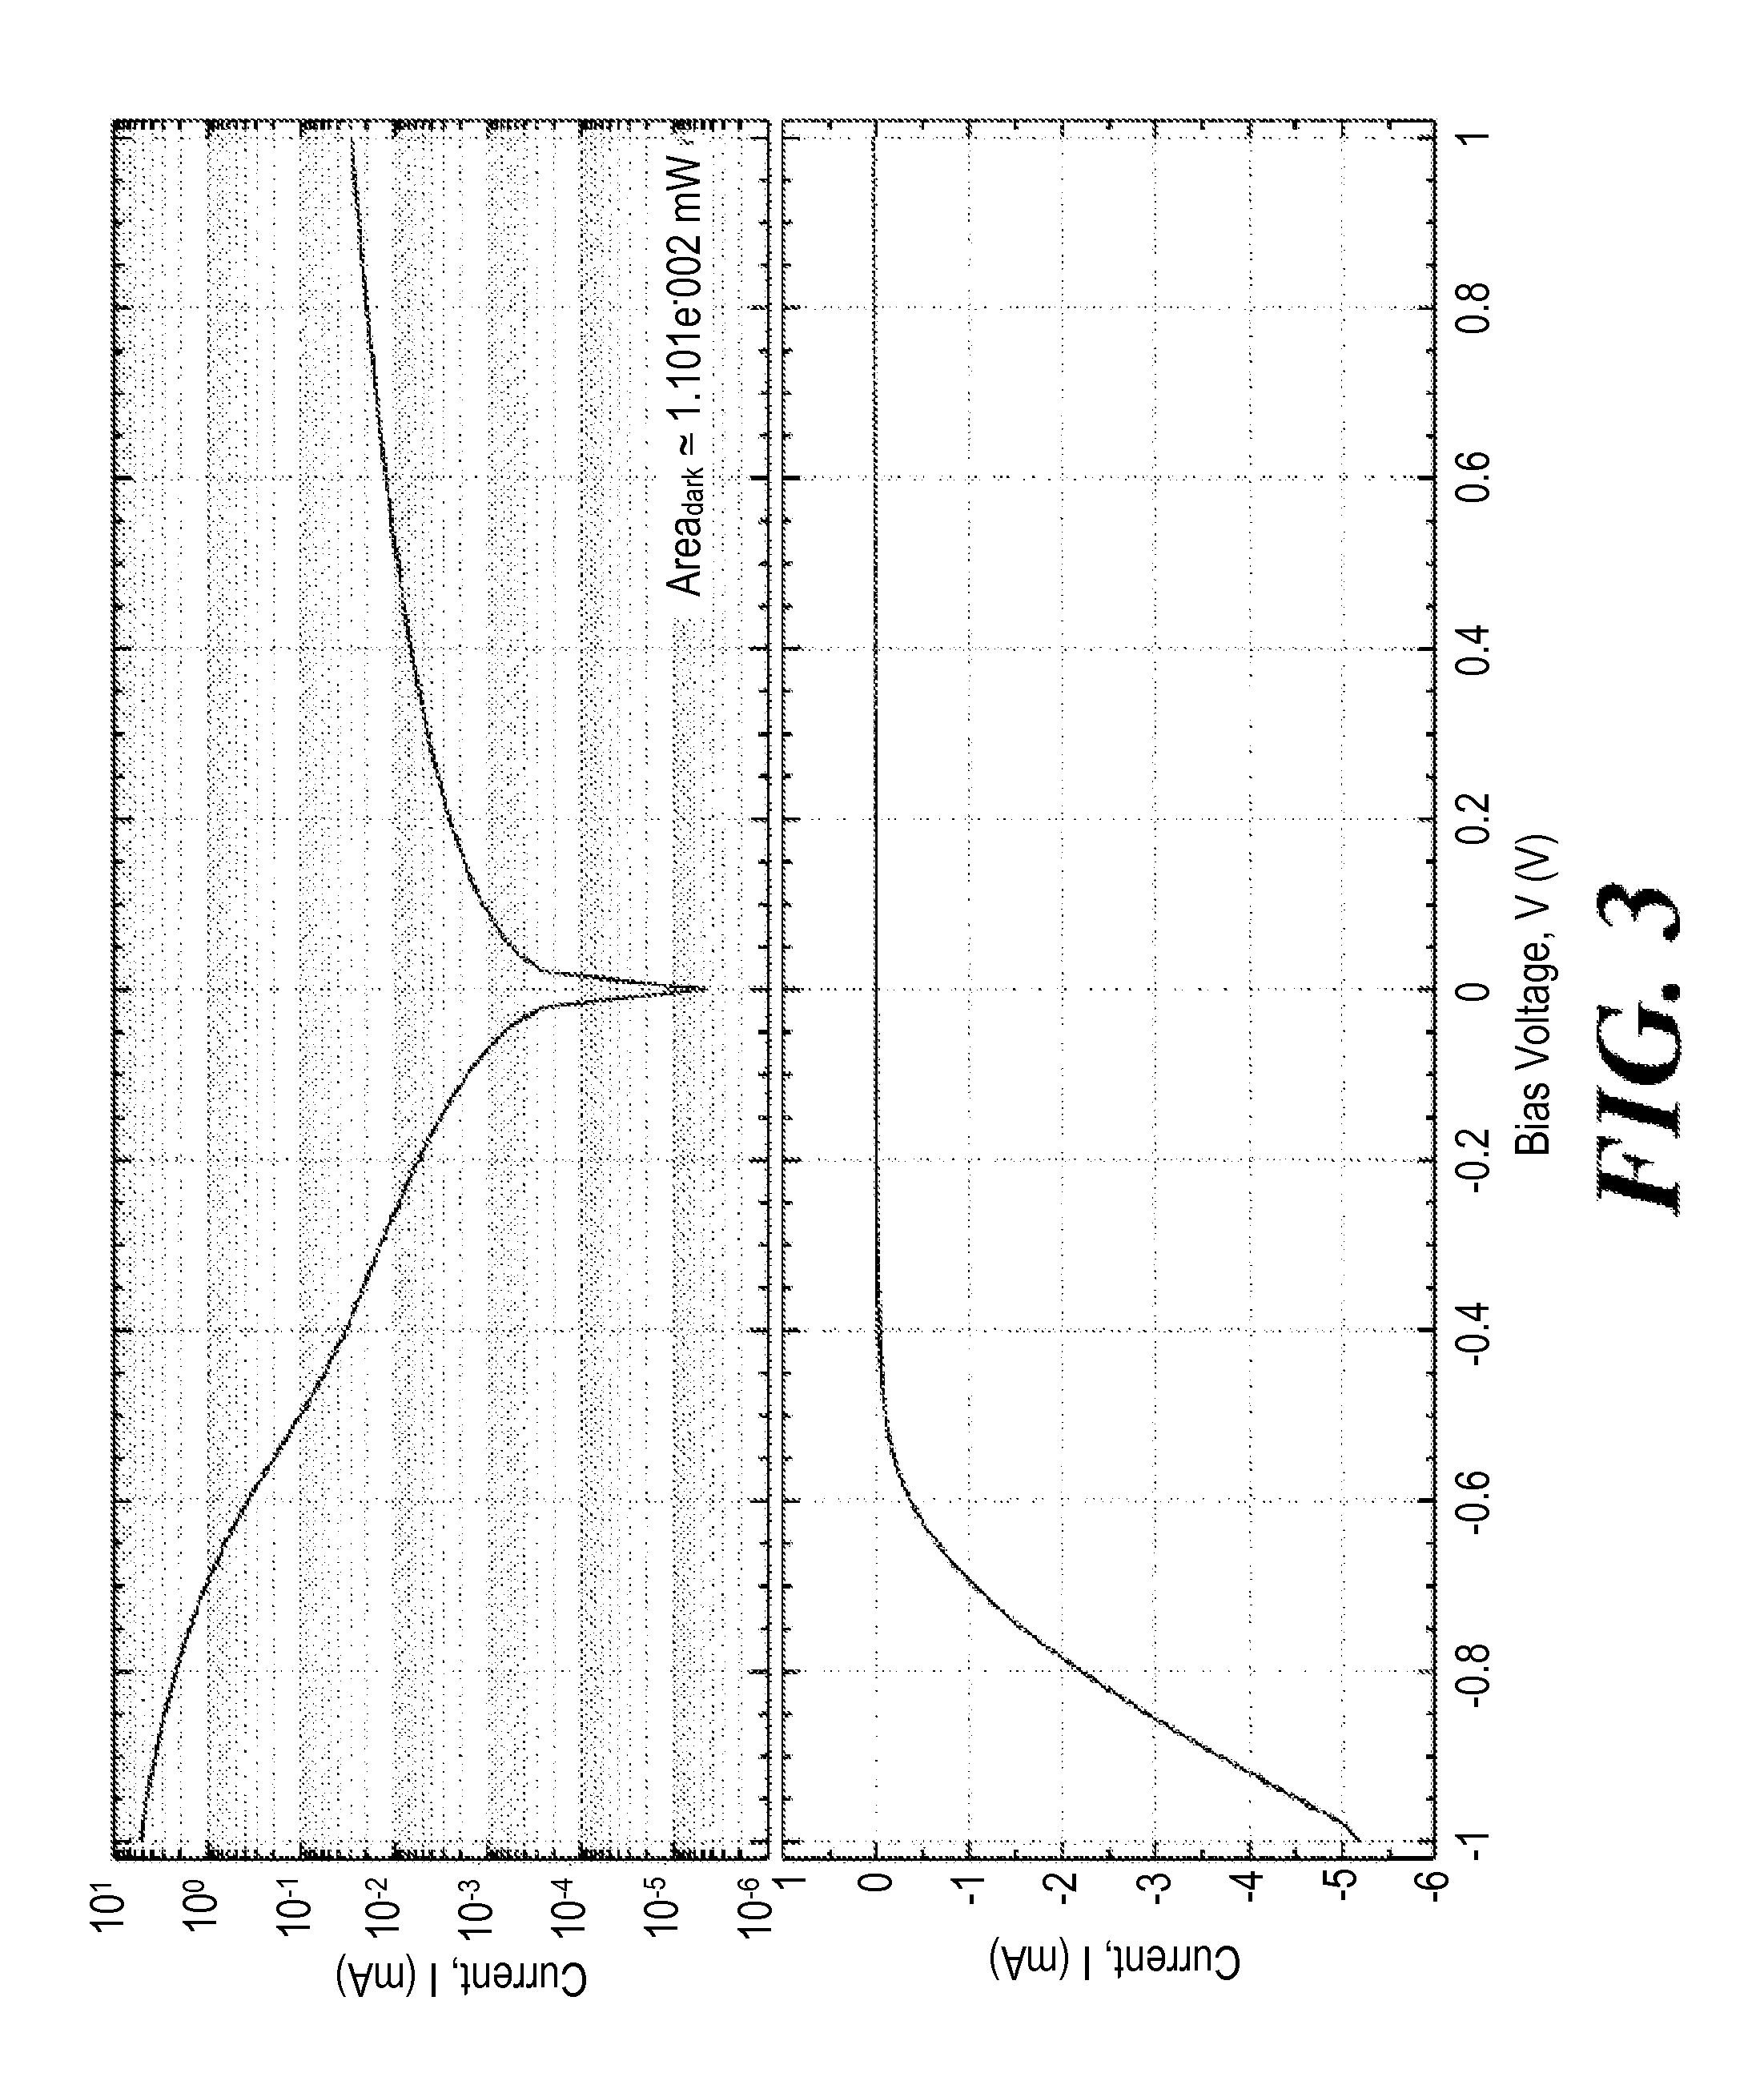 Multi-layer mesoporous coatings for conductive surfaces, and methods of preparing thereof